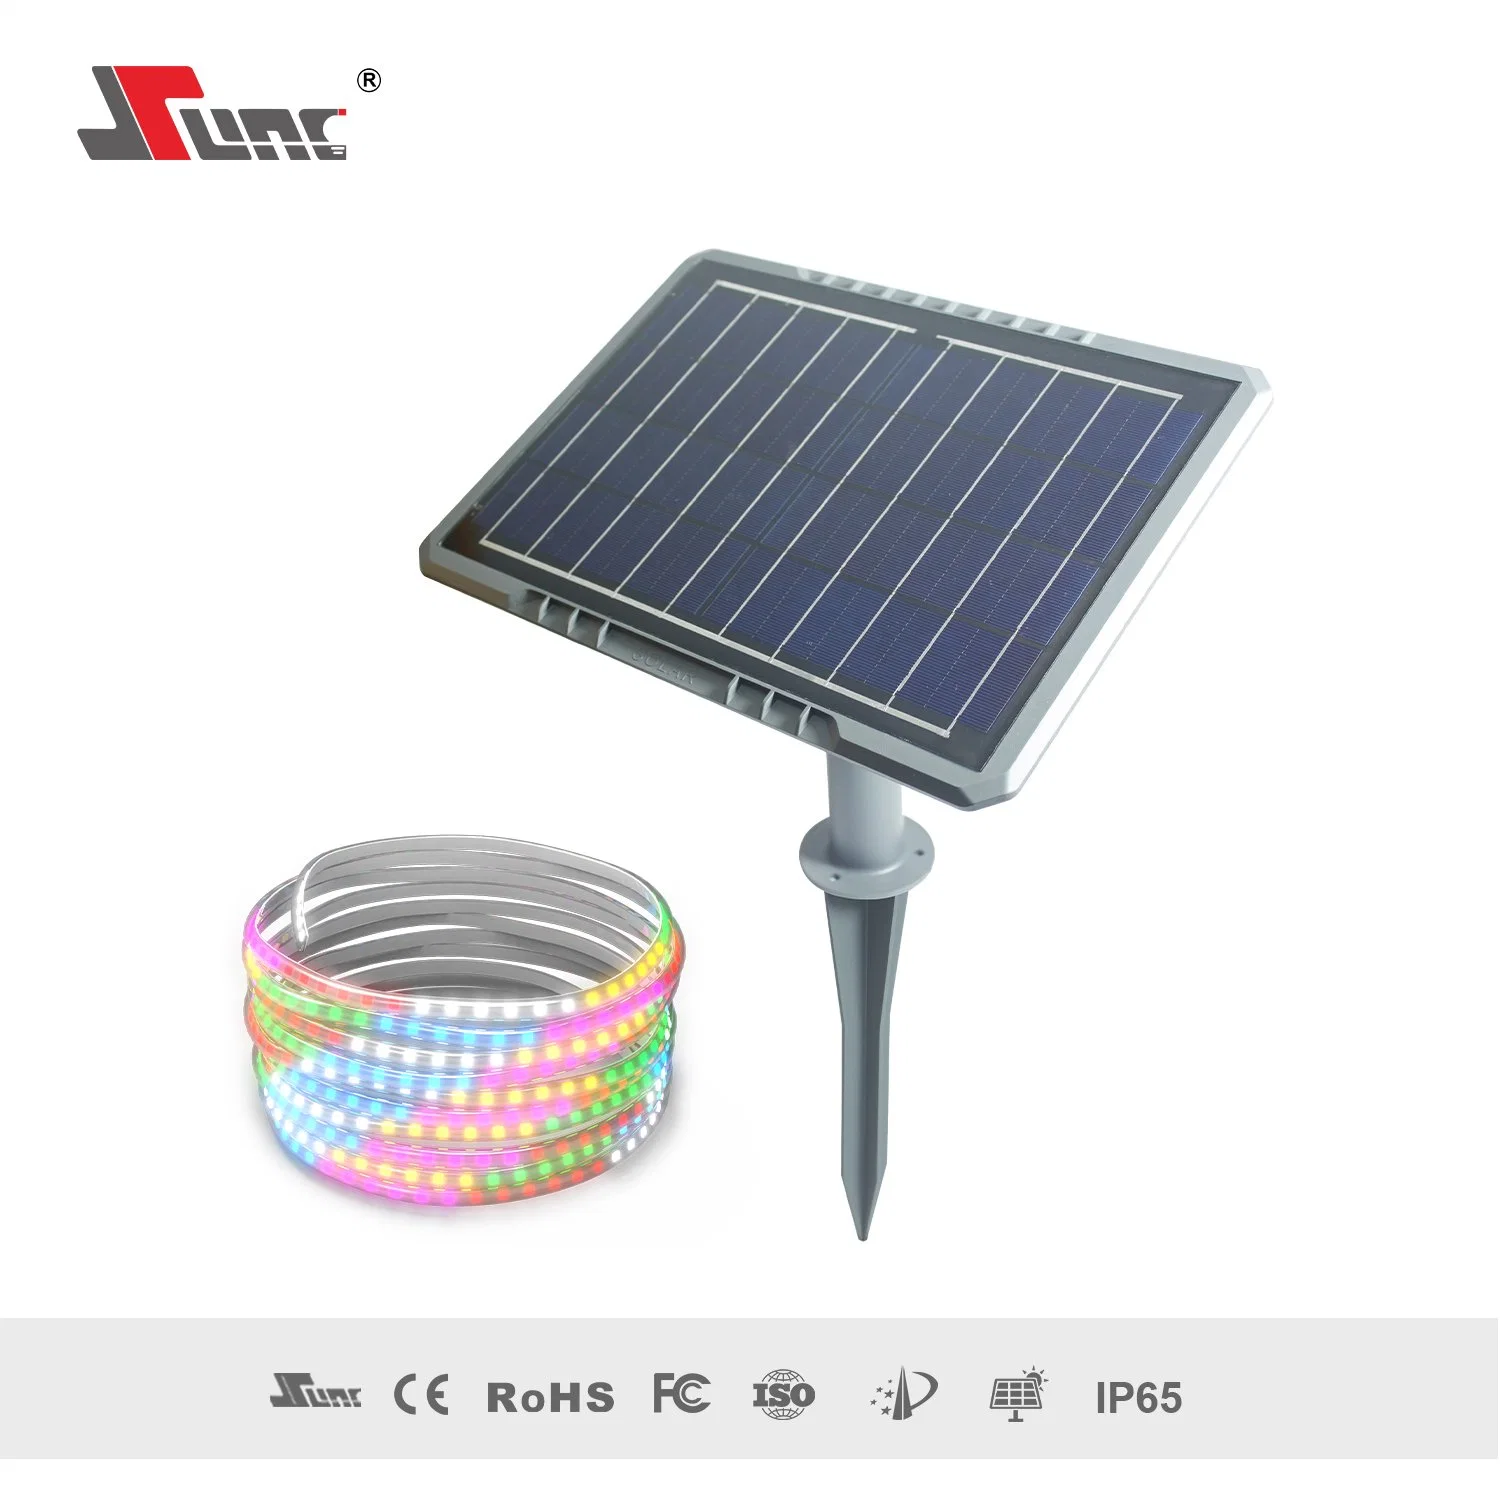 SMD5050 a Level Polycrystalline Silicon Solar LED Strip Lights with Remote